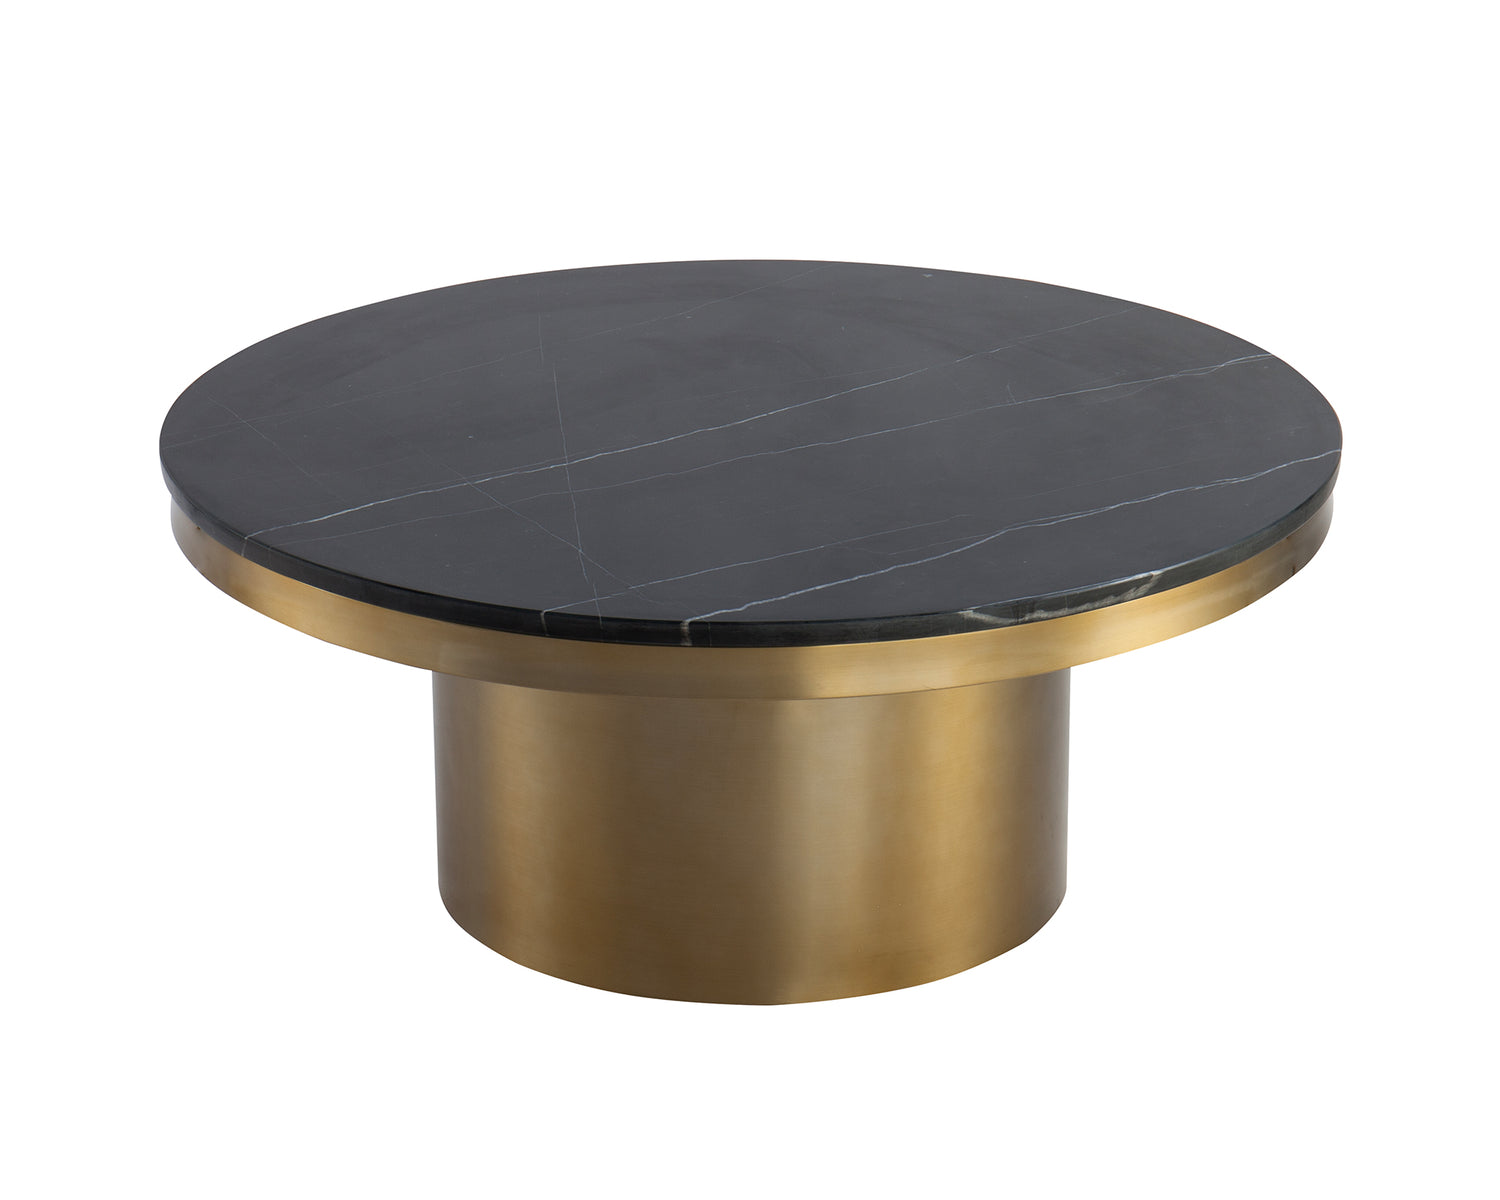  LiangAndEimilLarge-Liang & Eimil Camden Round Coffee Table Marquina Black-Black 33 